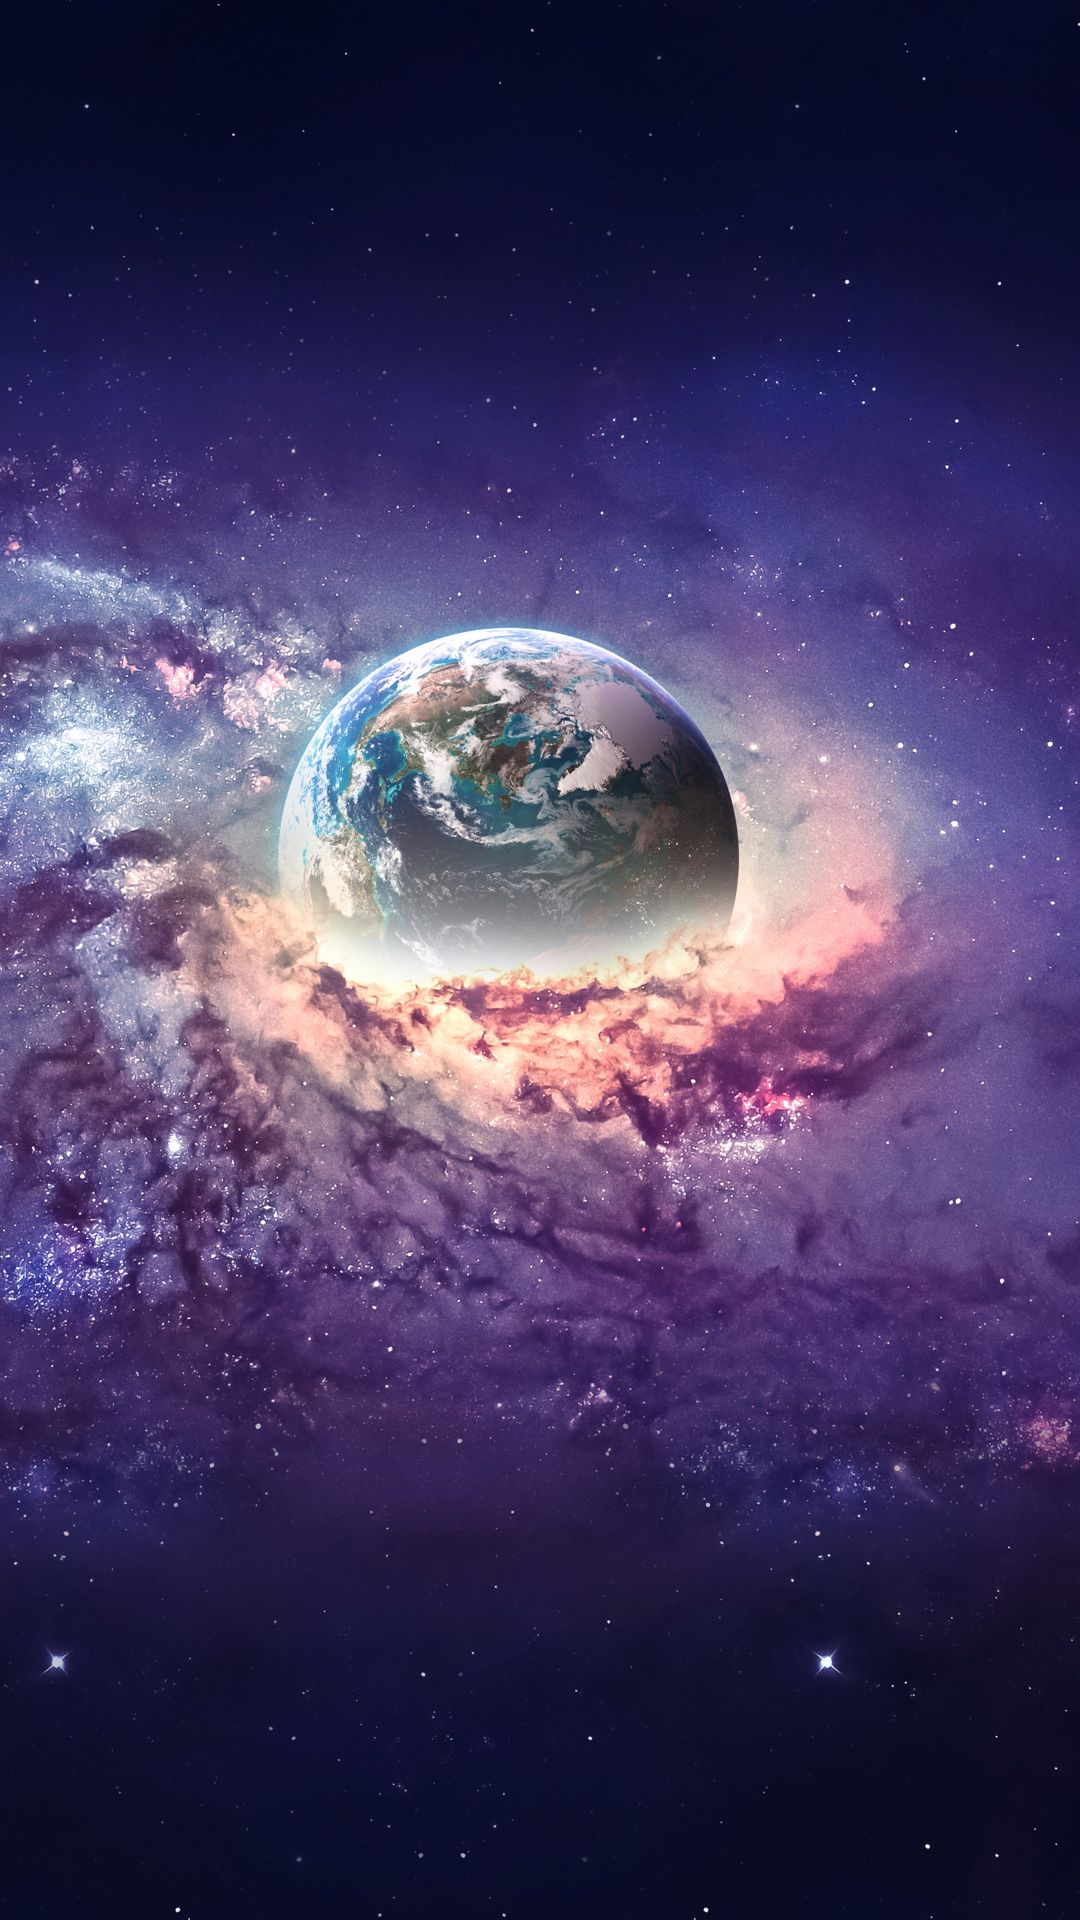 IPhone wallpaper with a planet surrounded by a galaxy - Galaxy